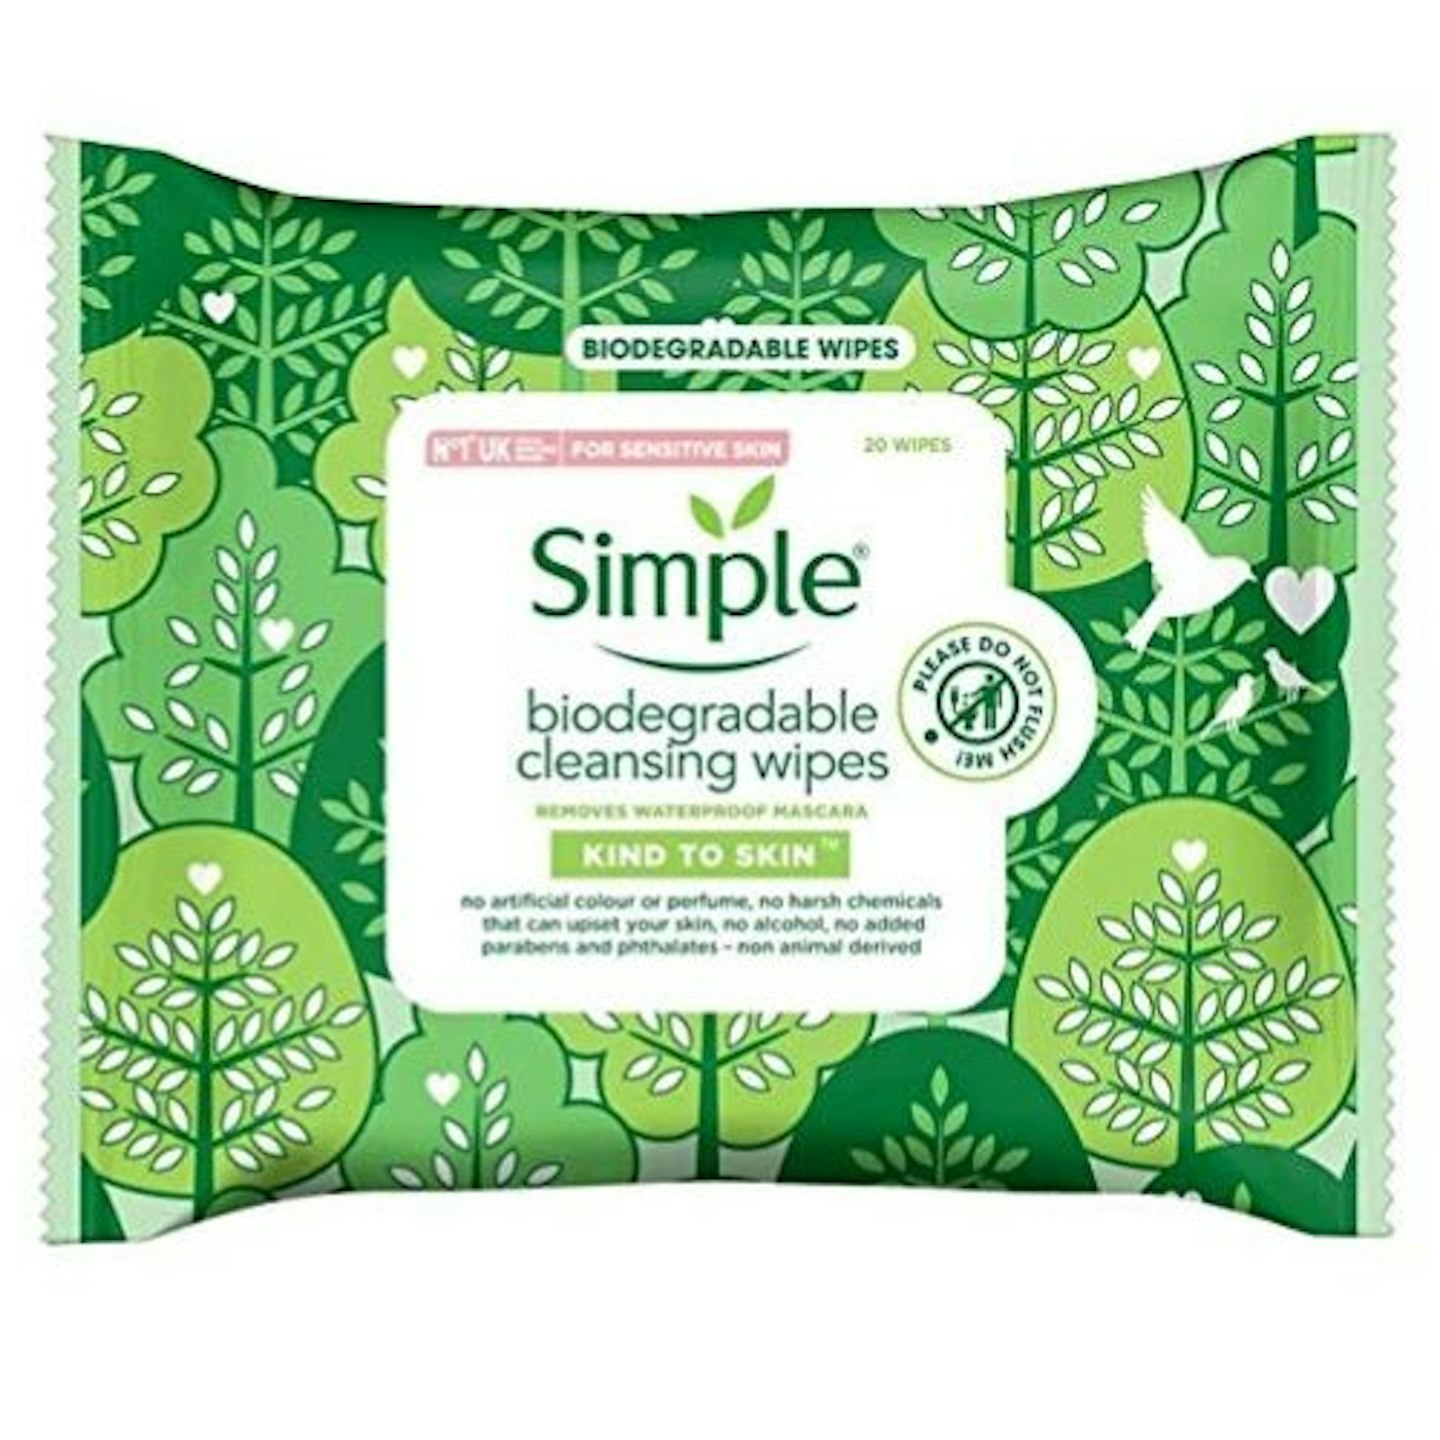 Simple Biodegradable Cleansing Wipes 20 Sheets (Pack of 3)